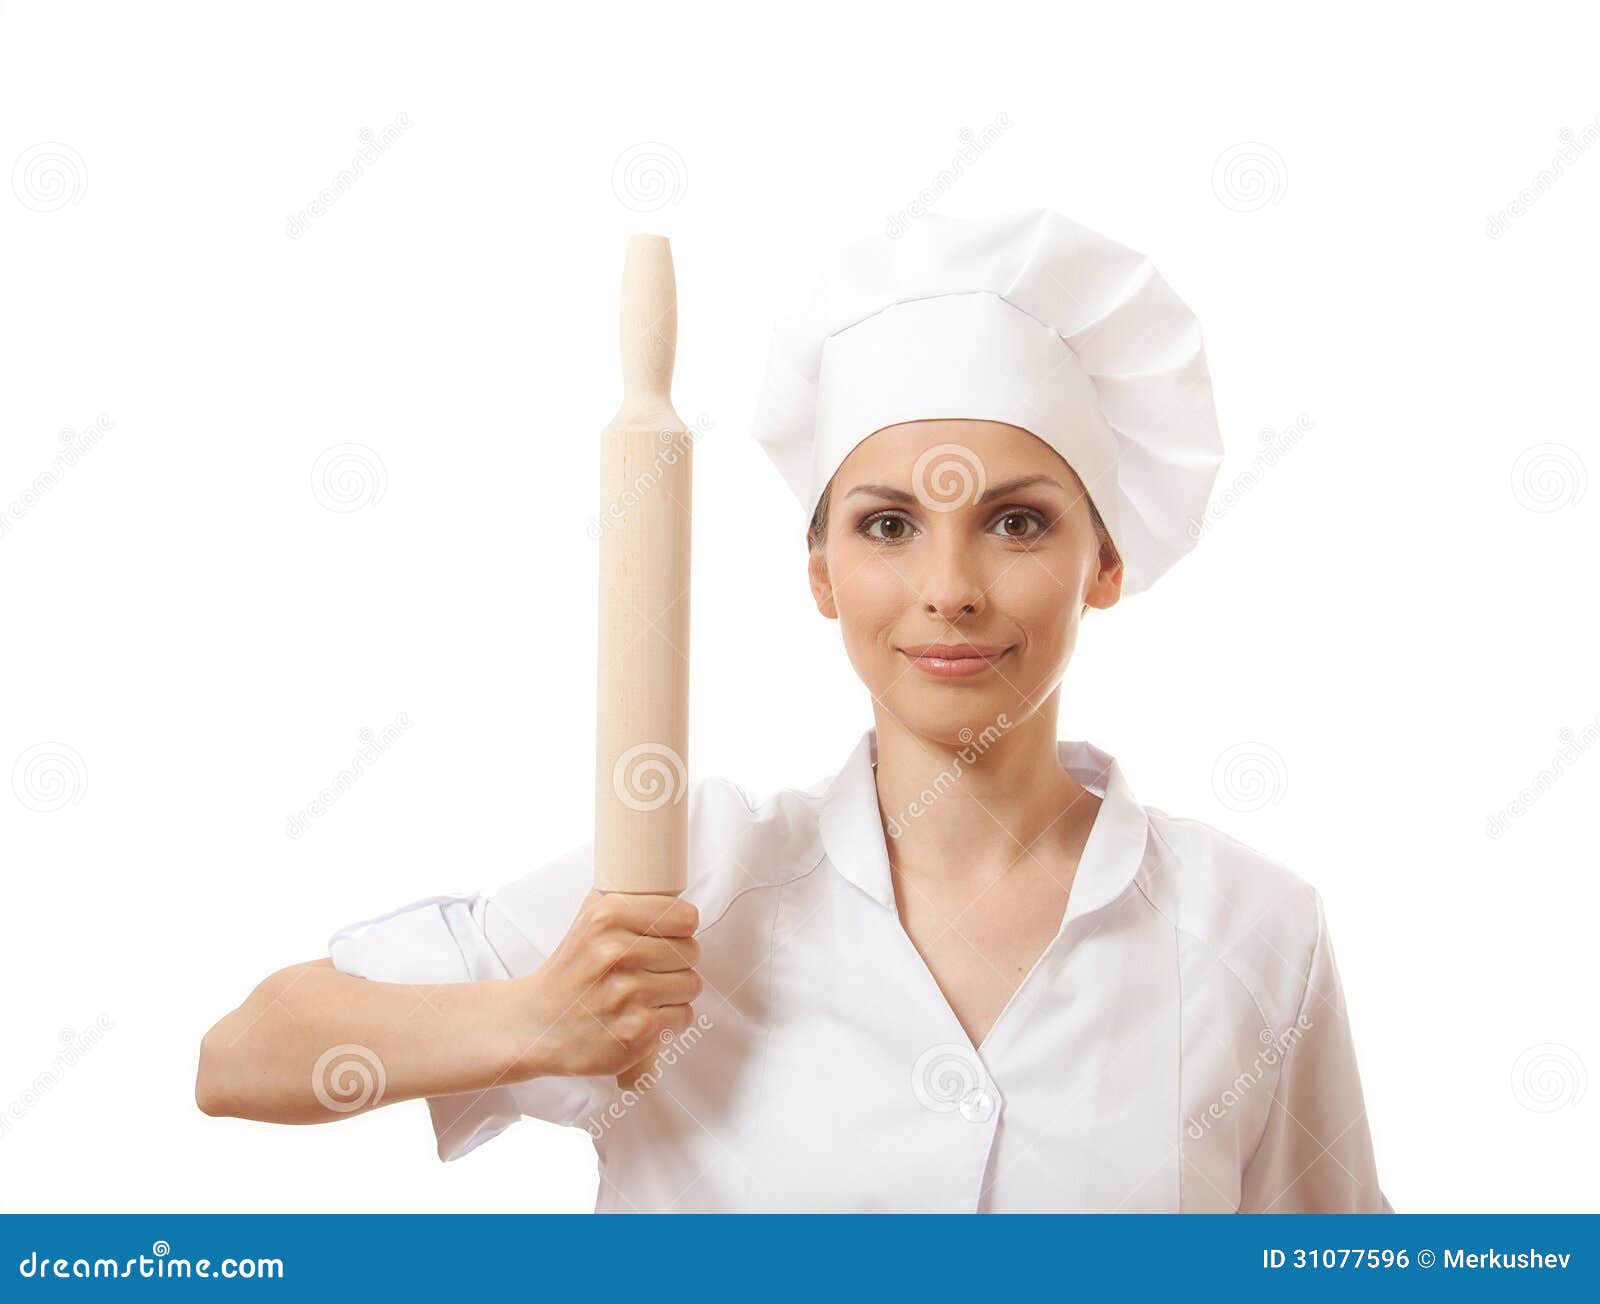 Baker / Chef Woman Holding Baking Rolling Pin Stock Photo - Image of ...